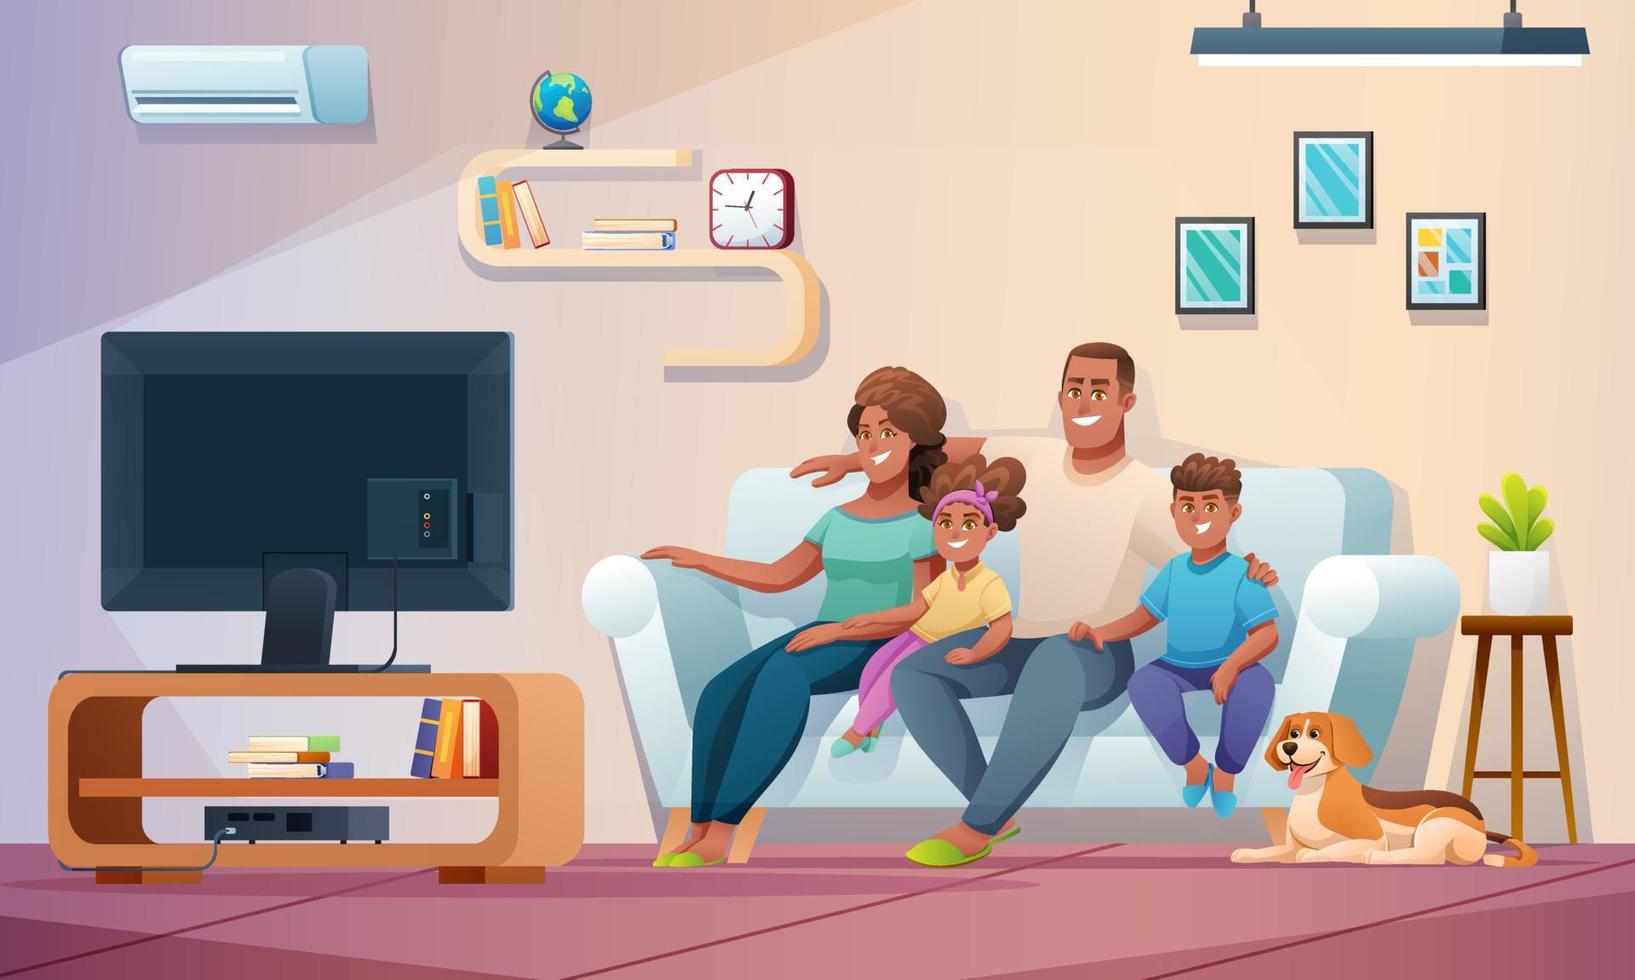 Happy family watching television together in living room. Family illustration in cartoon style vector